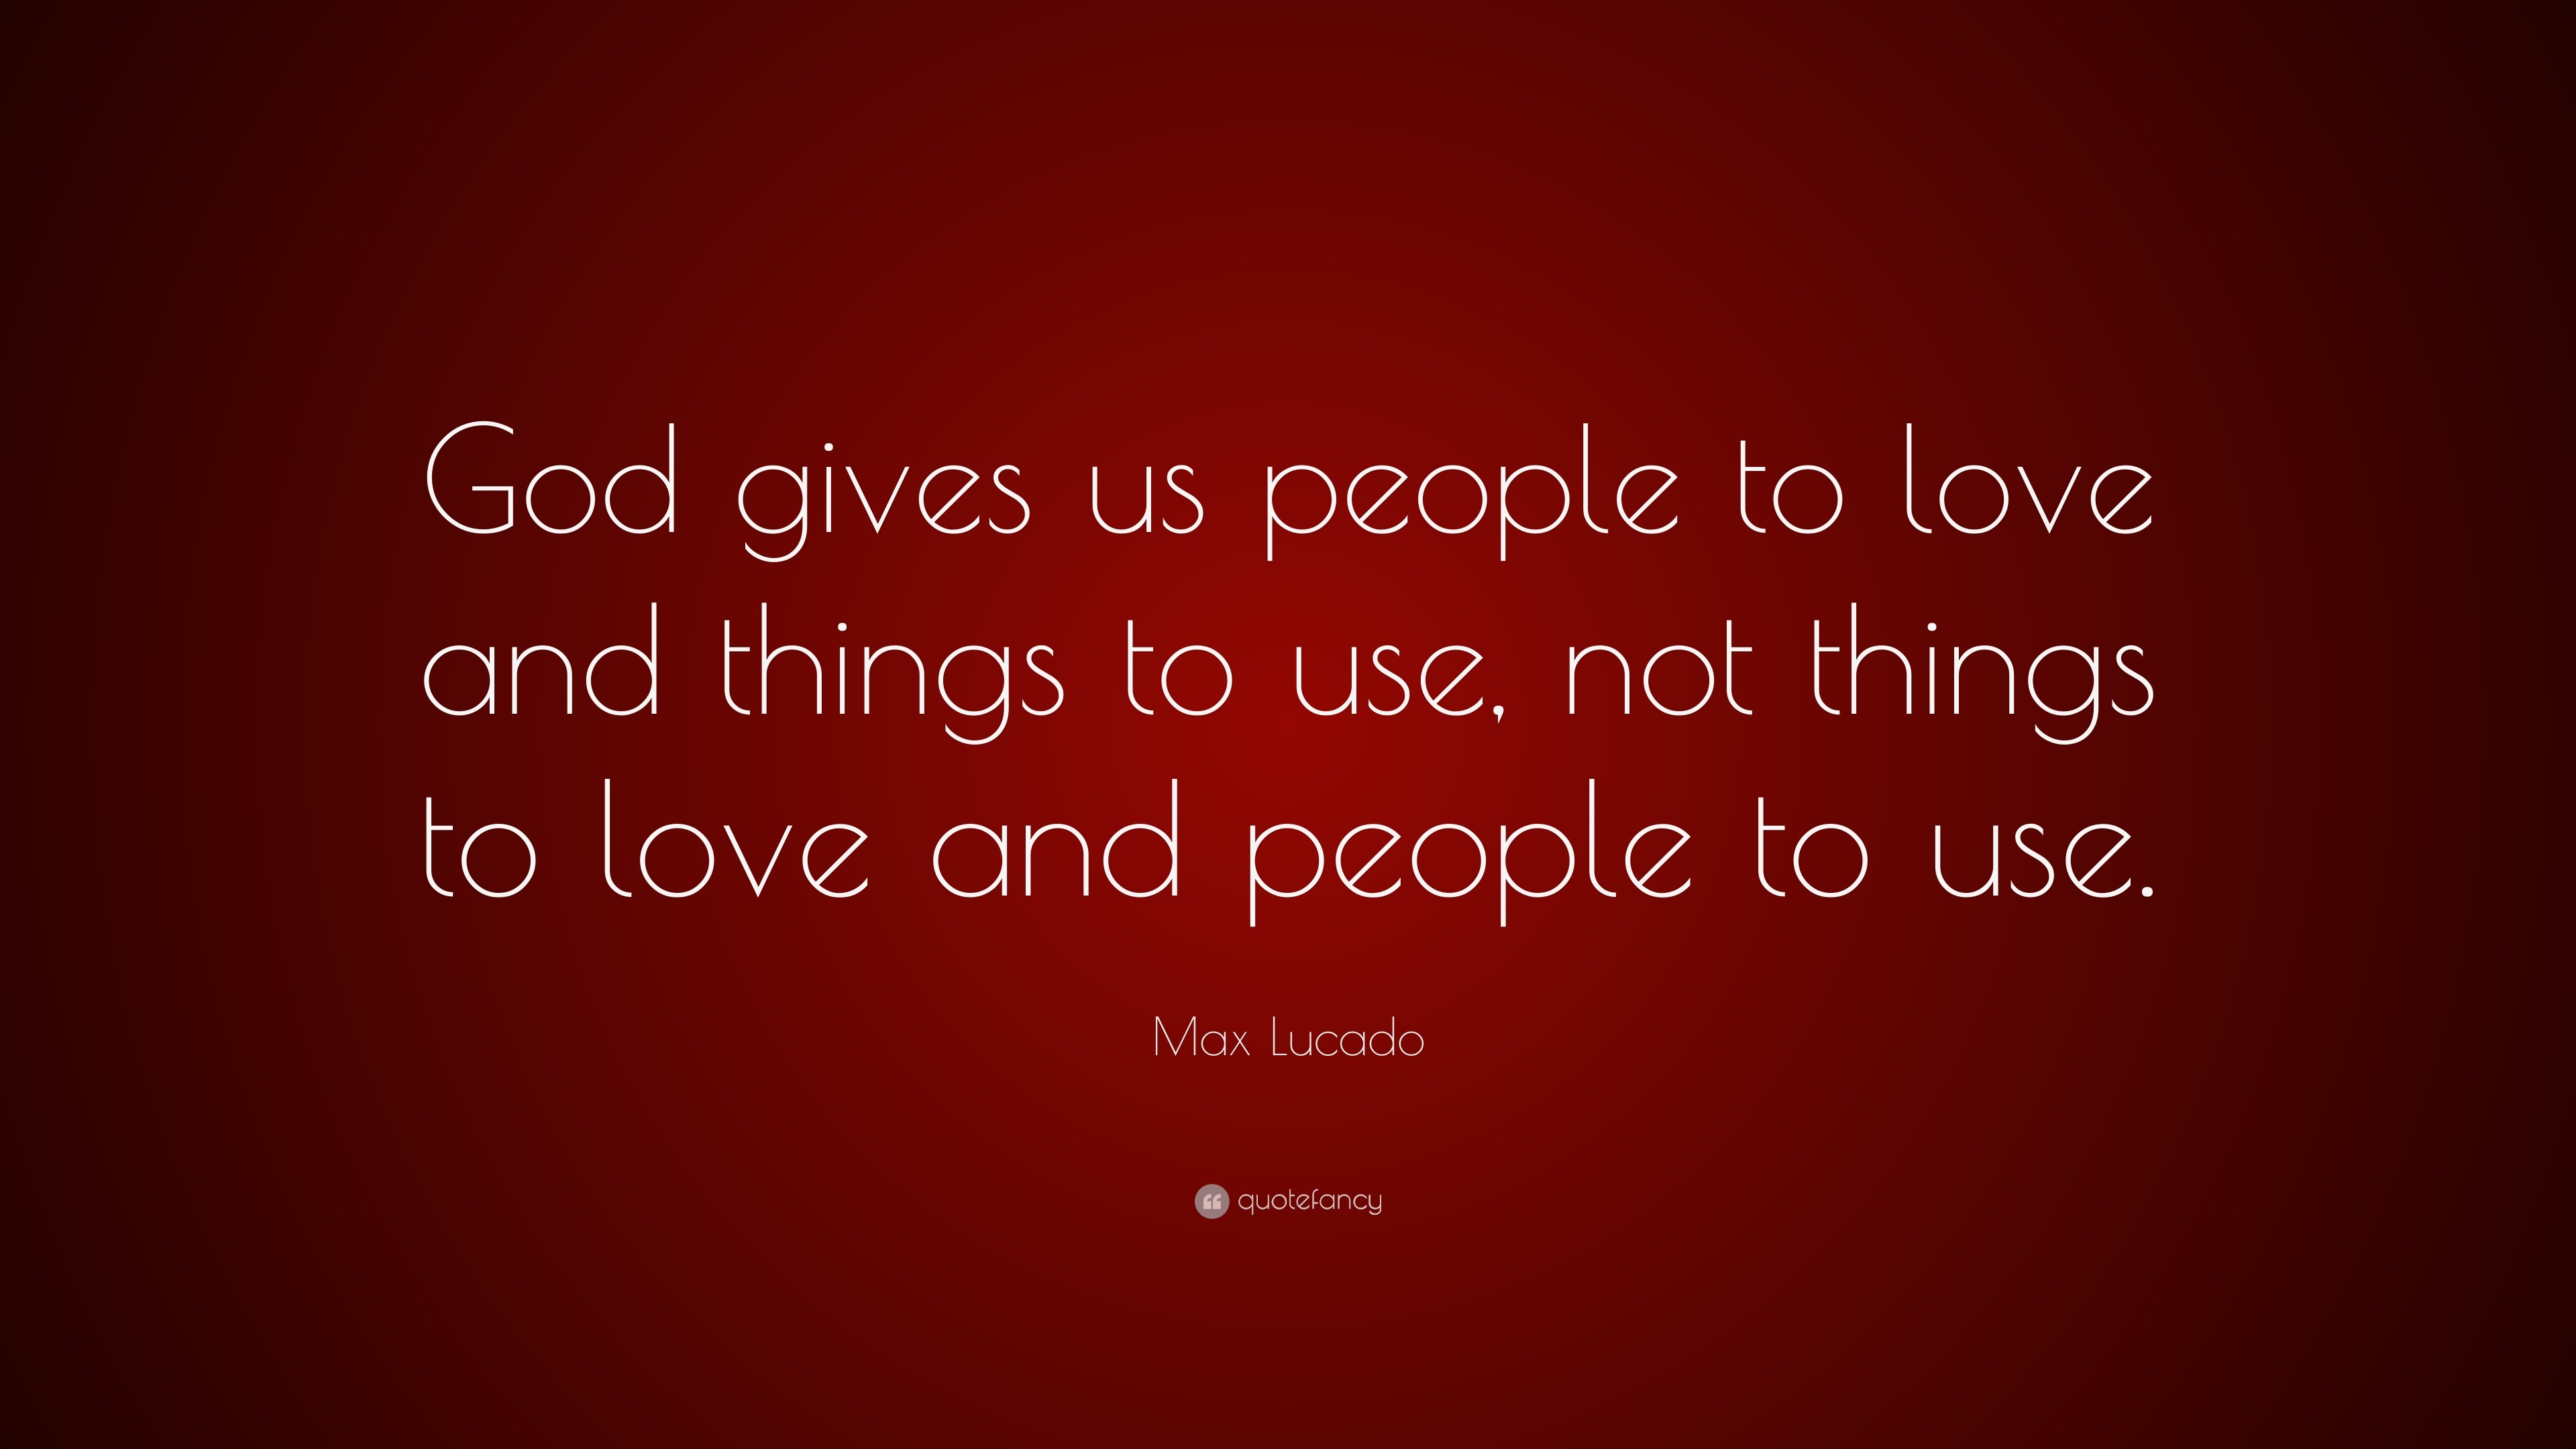 Max Lucado Quote “God gives us people to love and things to use